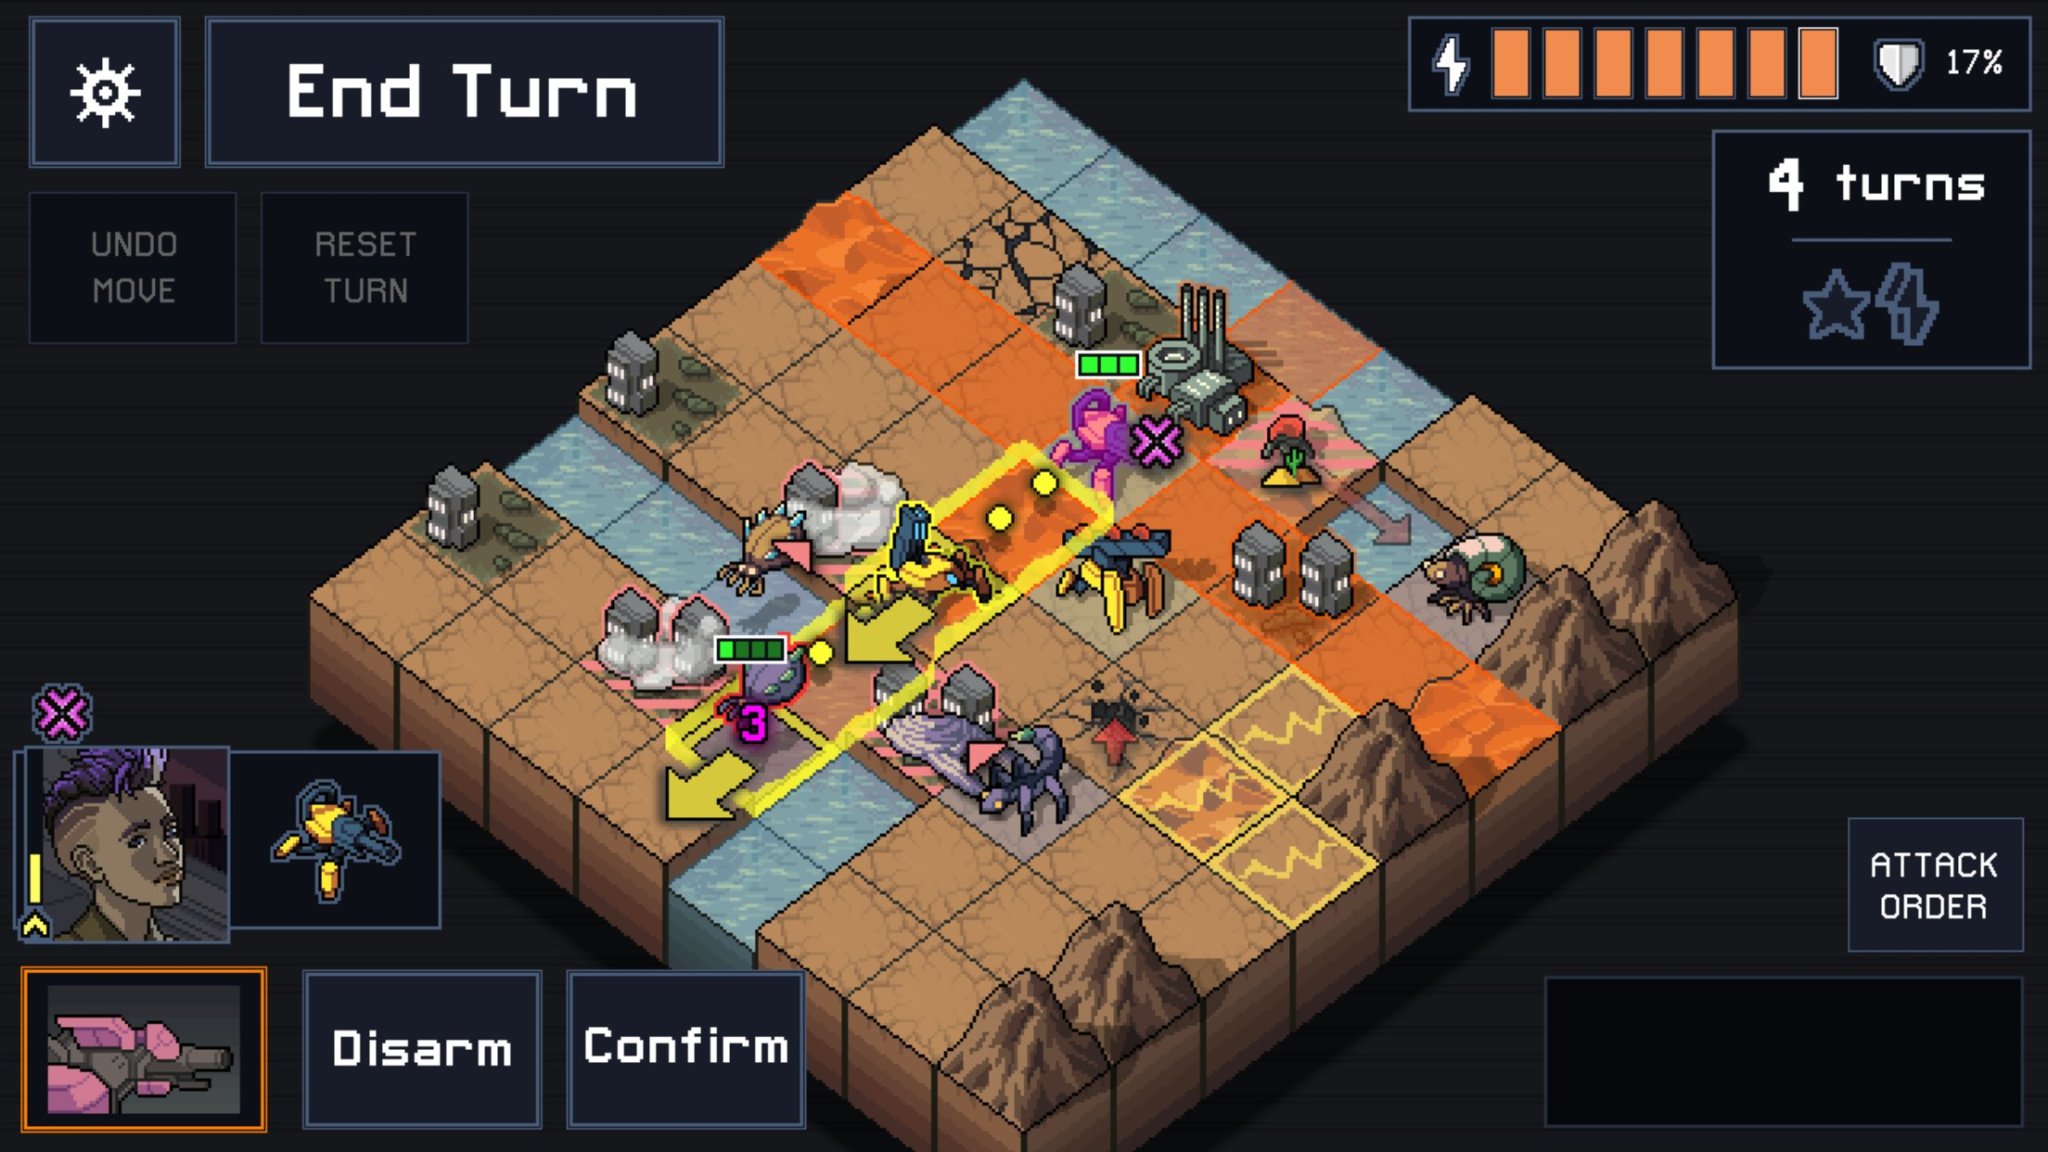 Netflix Games snags 'Into The Breach' as a mobile exclusive